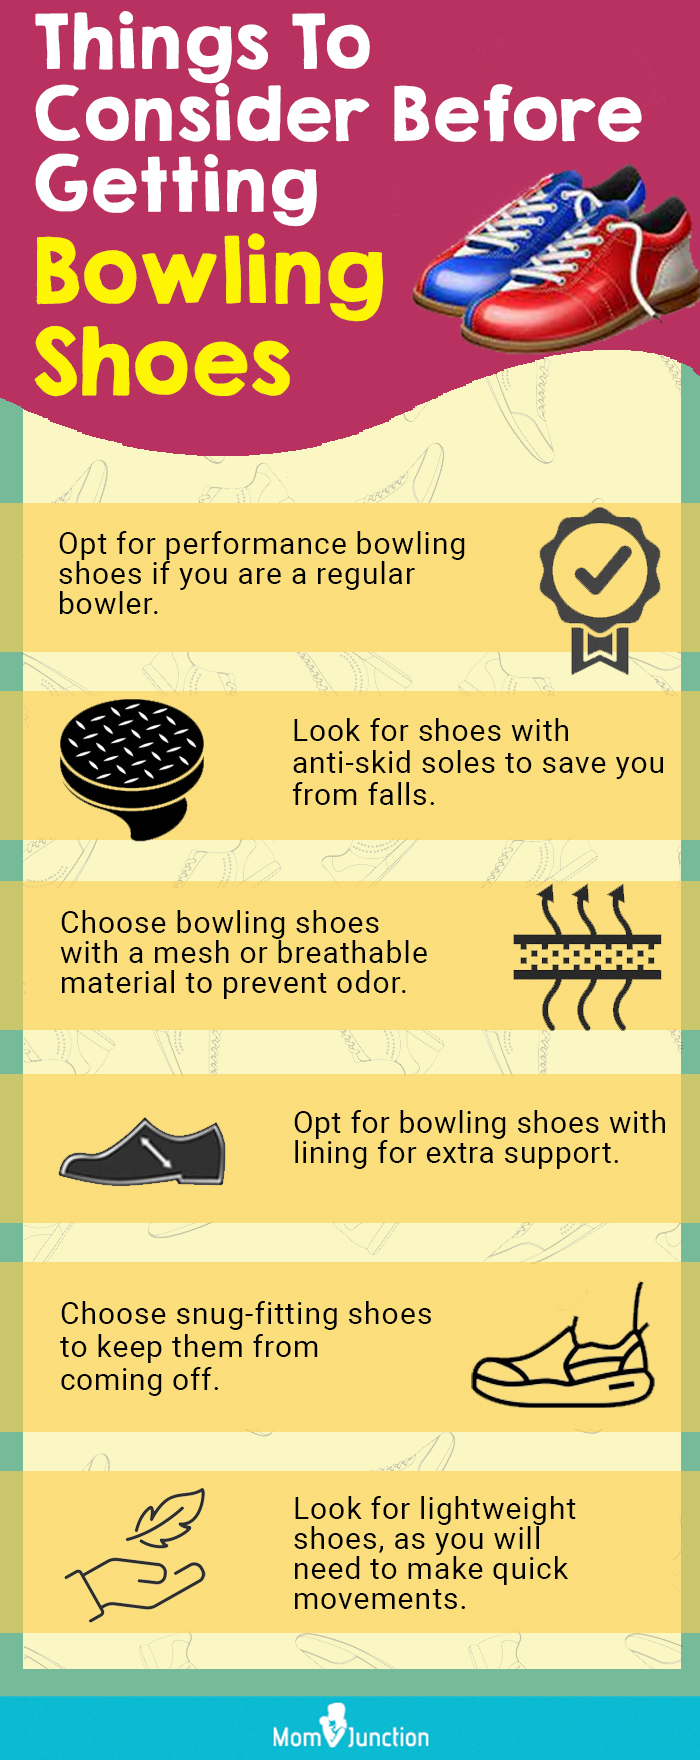 Things To Consider Before Getting Bowling Shoes